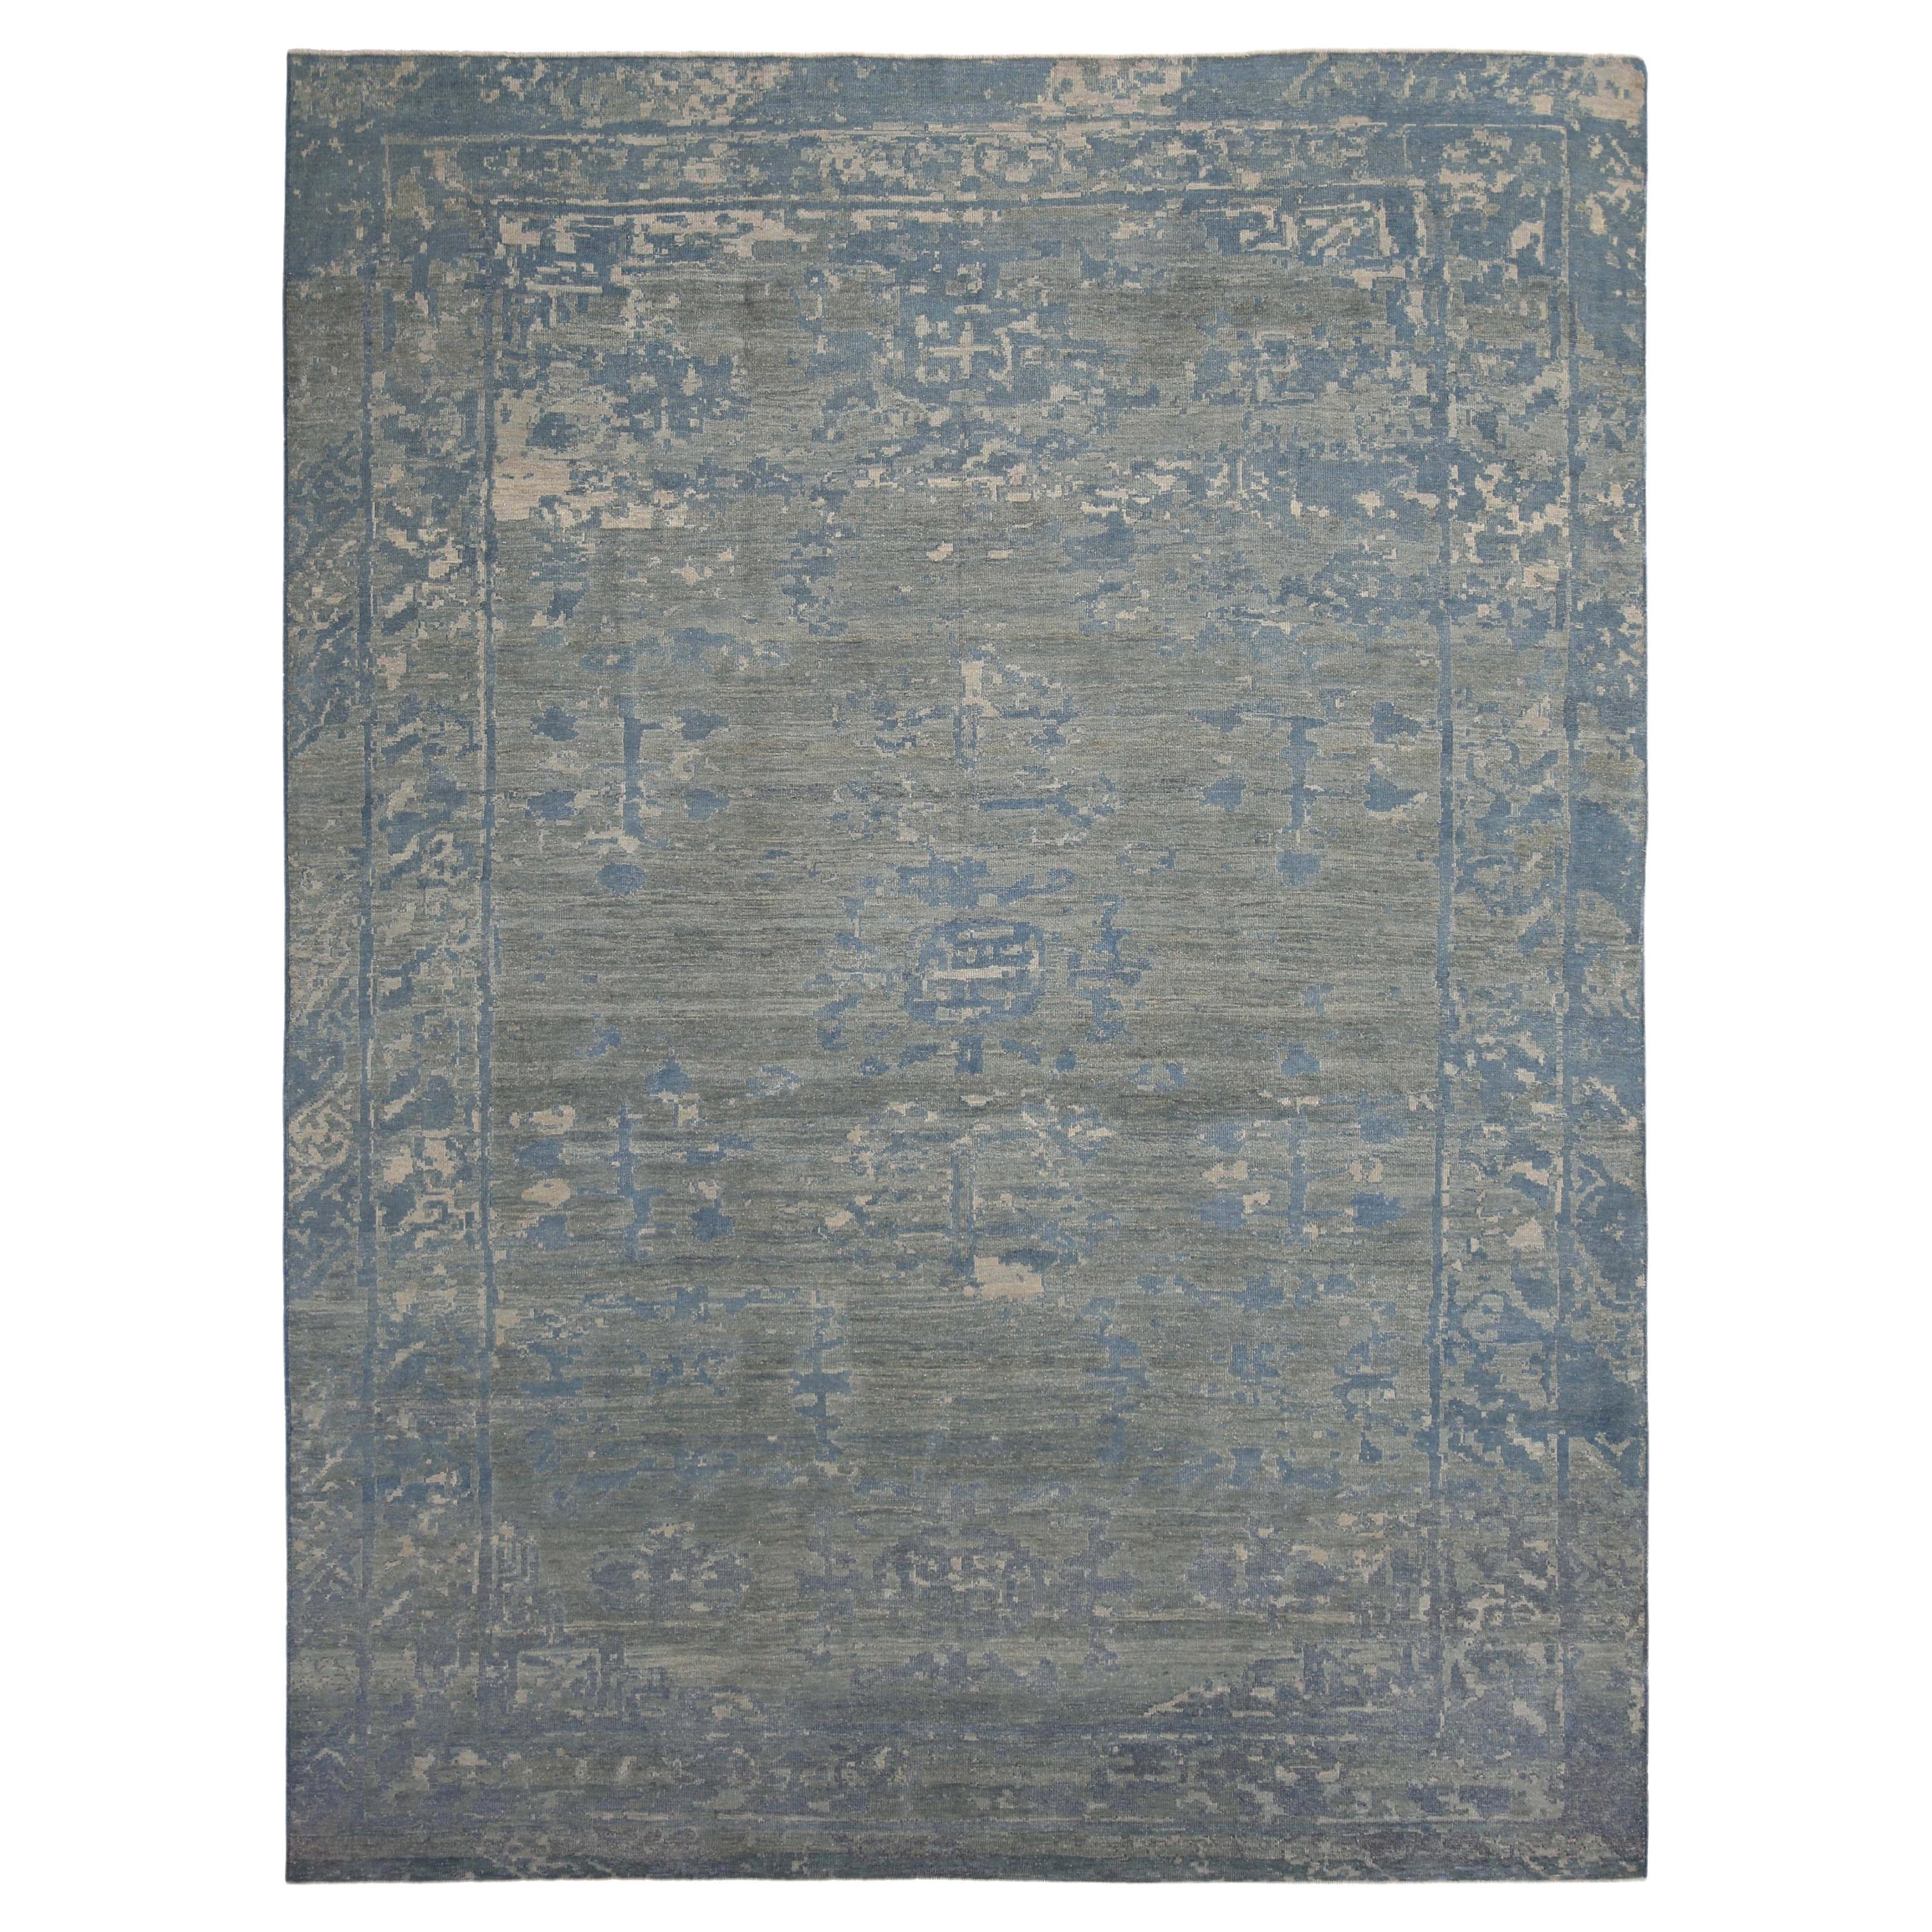 Exquisite Handmade Sultanabad Rug For Sale